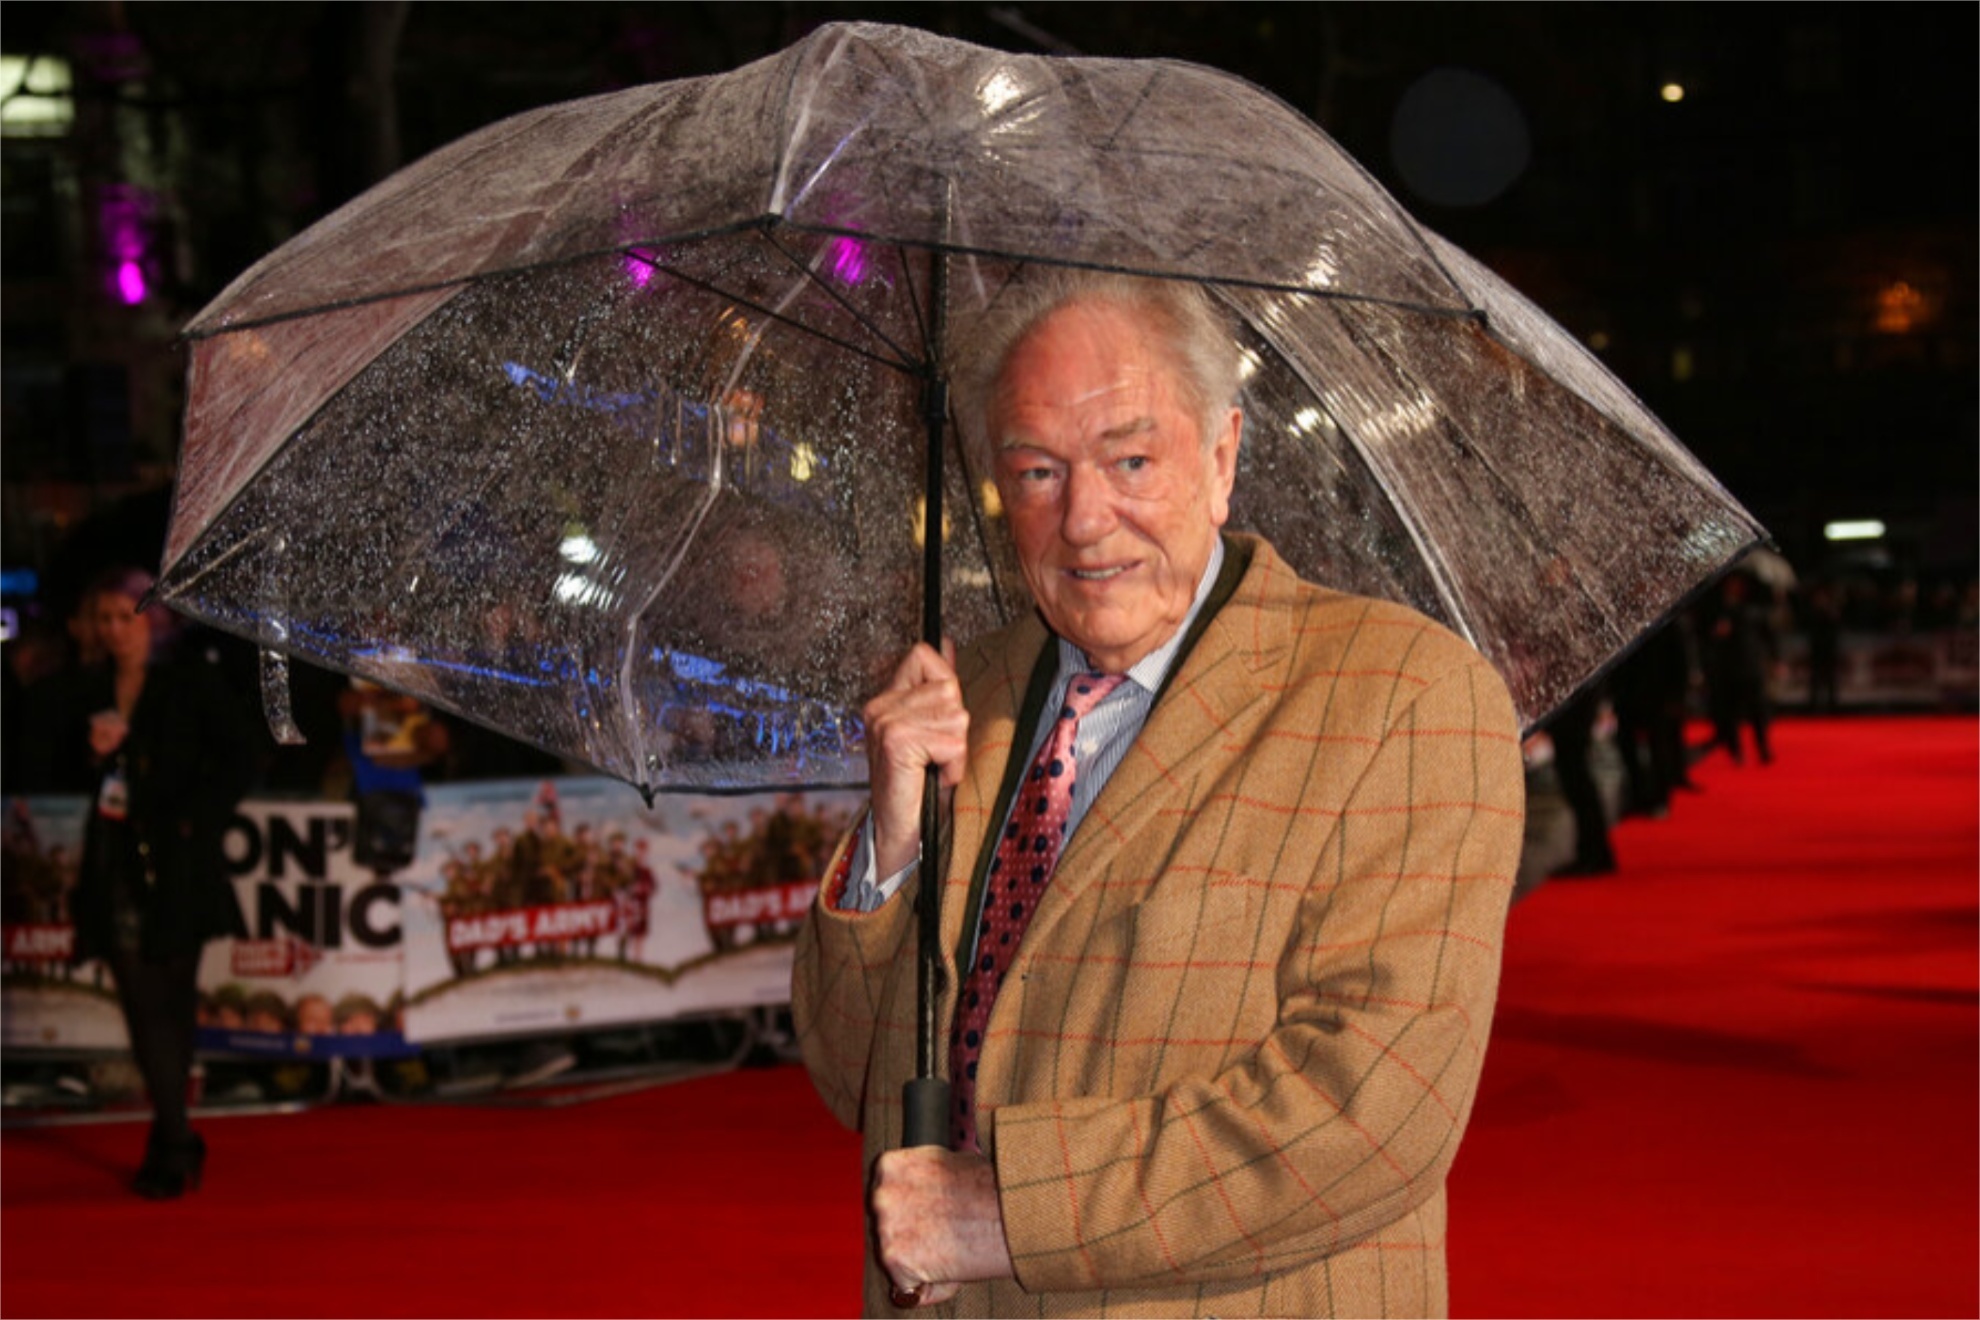 Michael Gambon, who played Dumbledore in the Harry Potter franchise, died on Wednesday